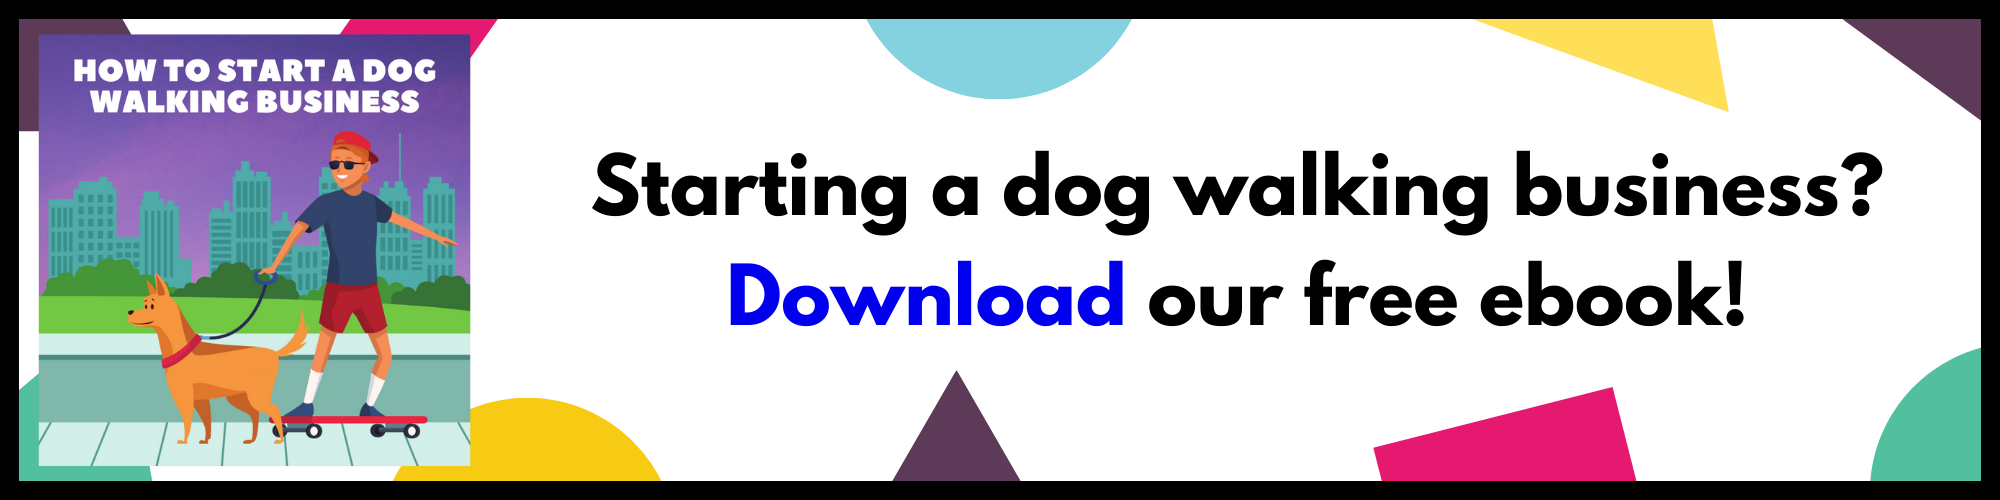 How-to-start-a-dog-walking-business-CTA